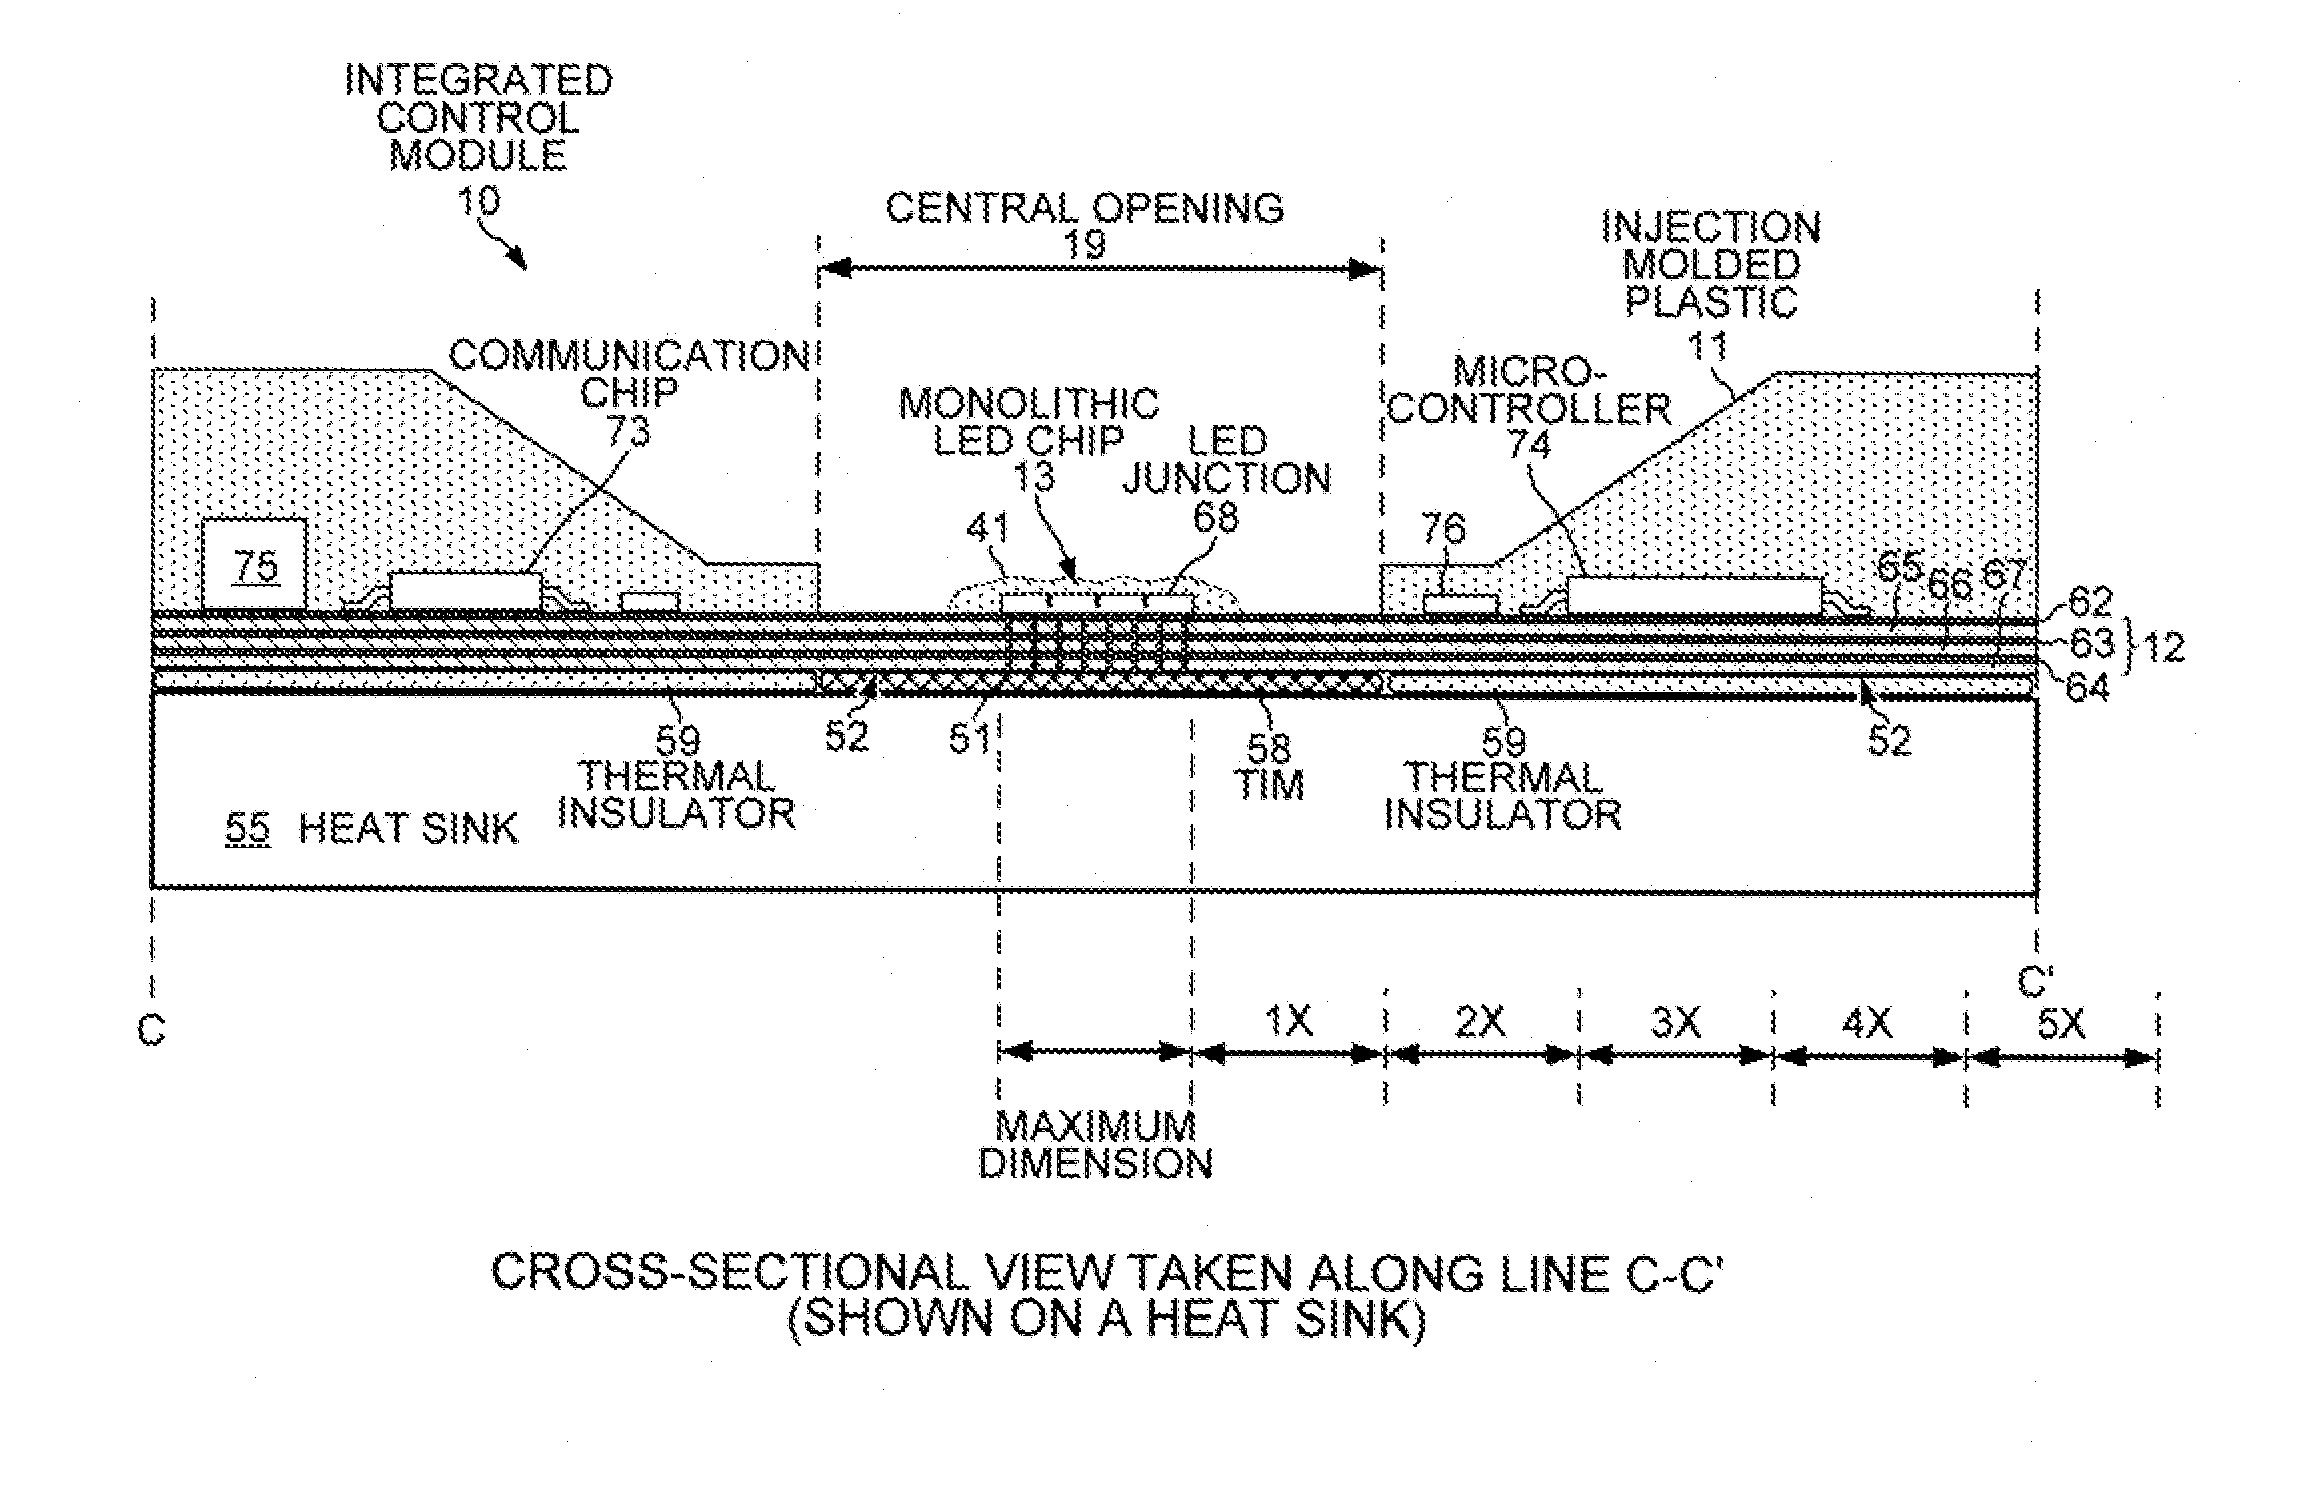 Monolithic LED chip in an integrated control module with active circuitry